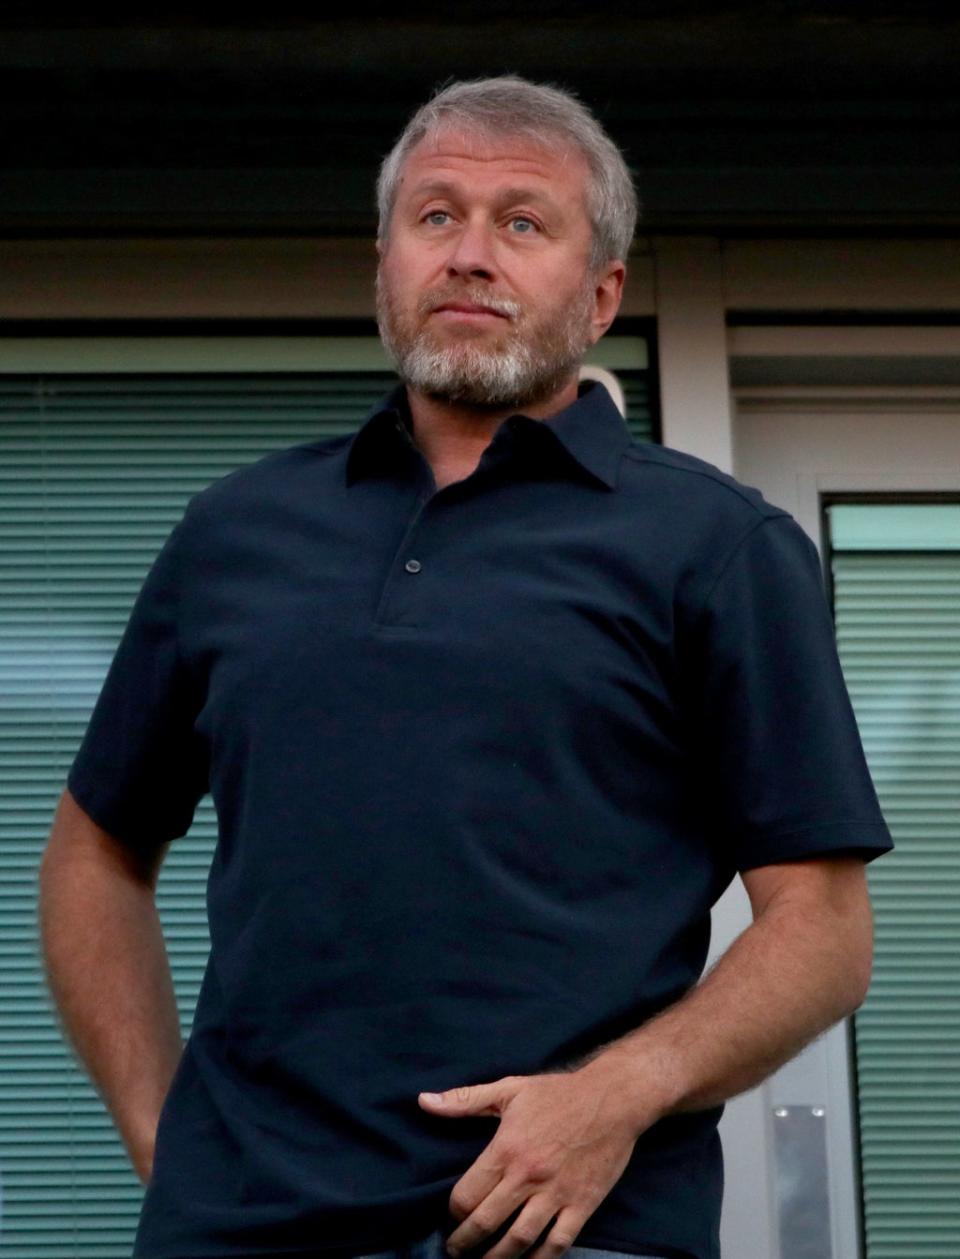 Roman Abramovich handed the ‘stewardship and care’ of Chelsea to the club’s foundation trustees in a statement on Saturday night (Nick Potts/PA) (PA Archive)